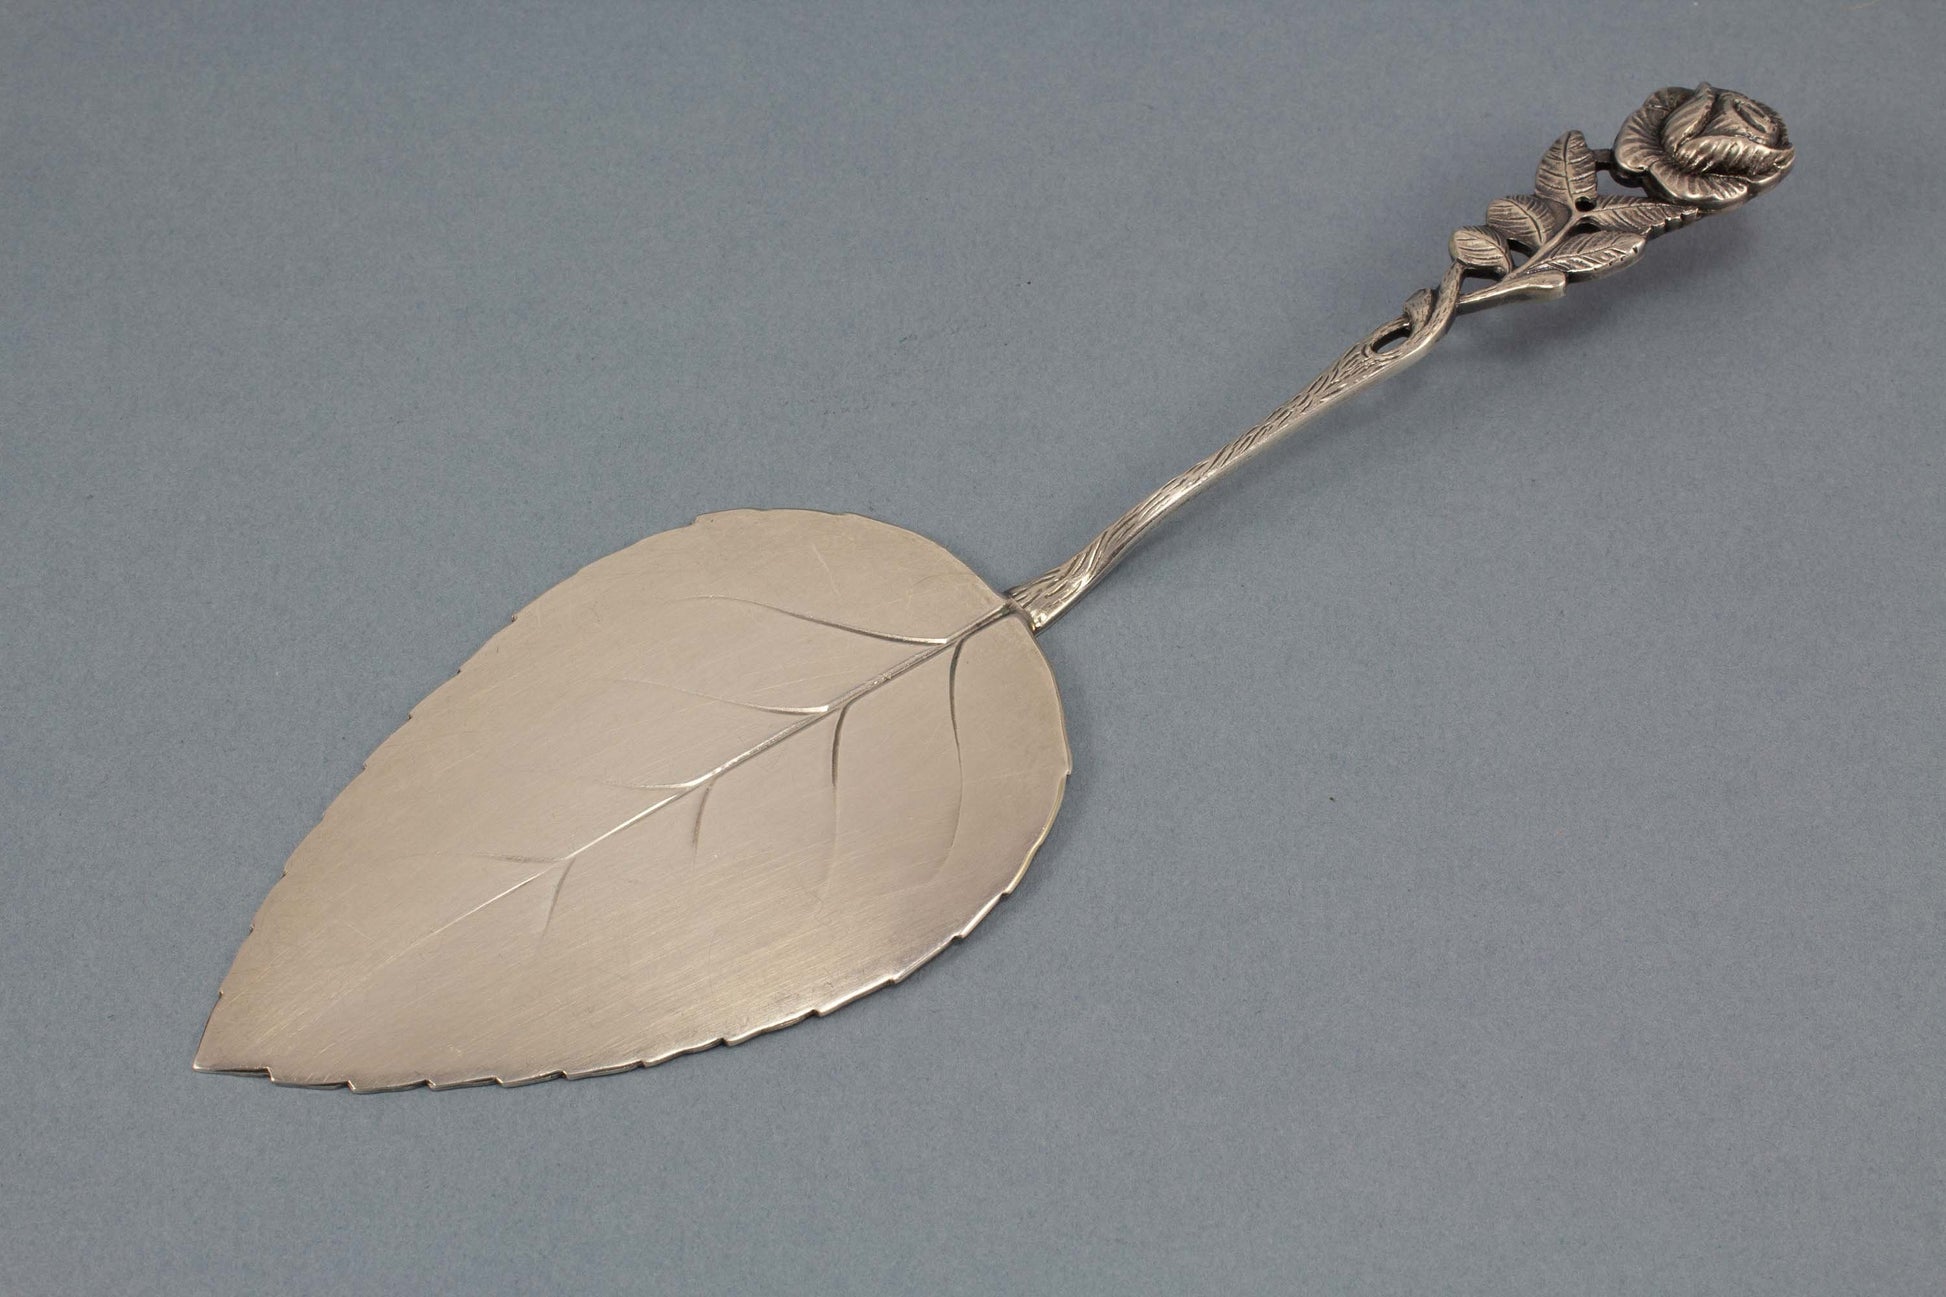 Cake server with rose decoration, silver-plated